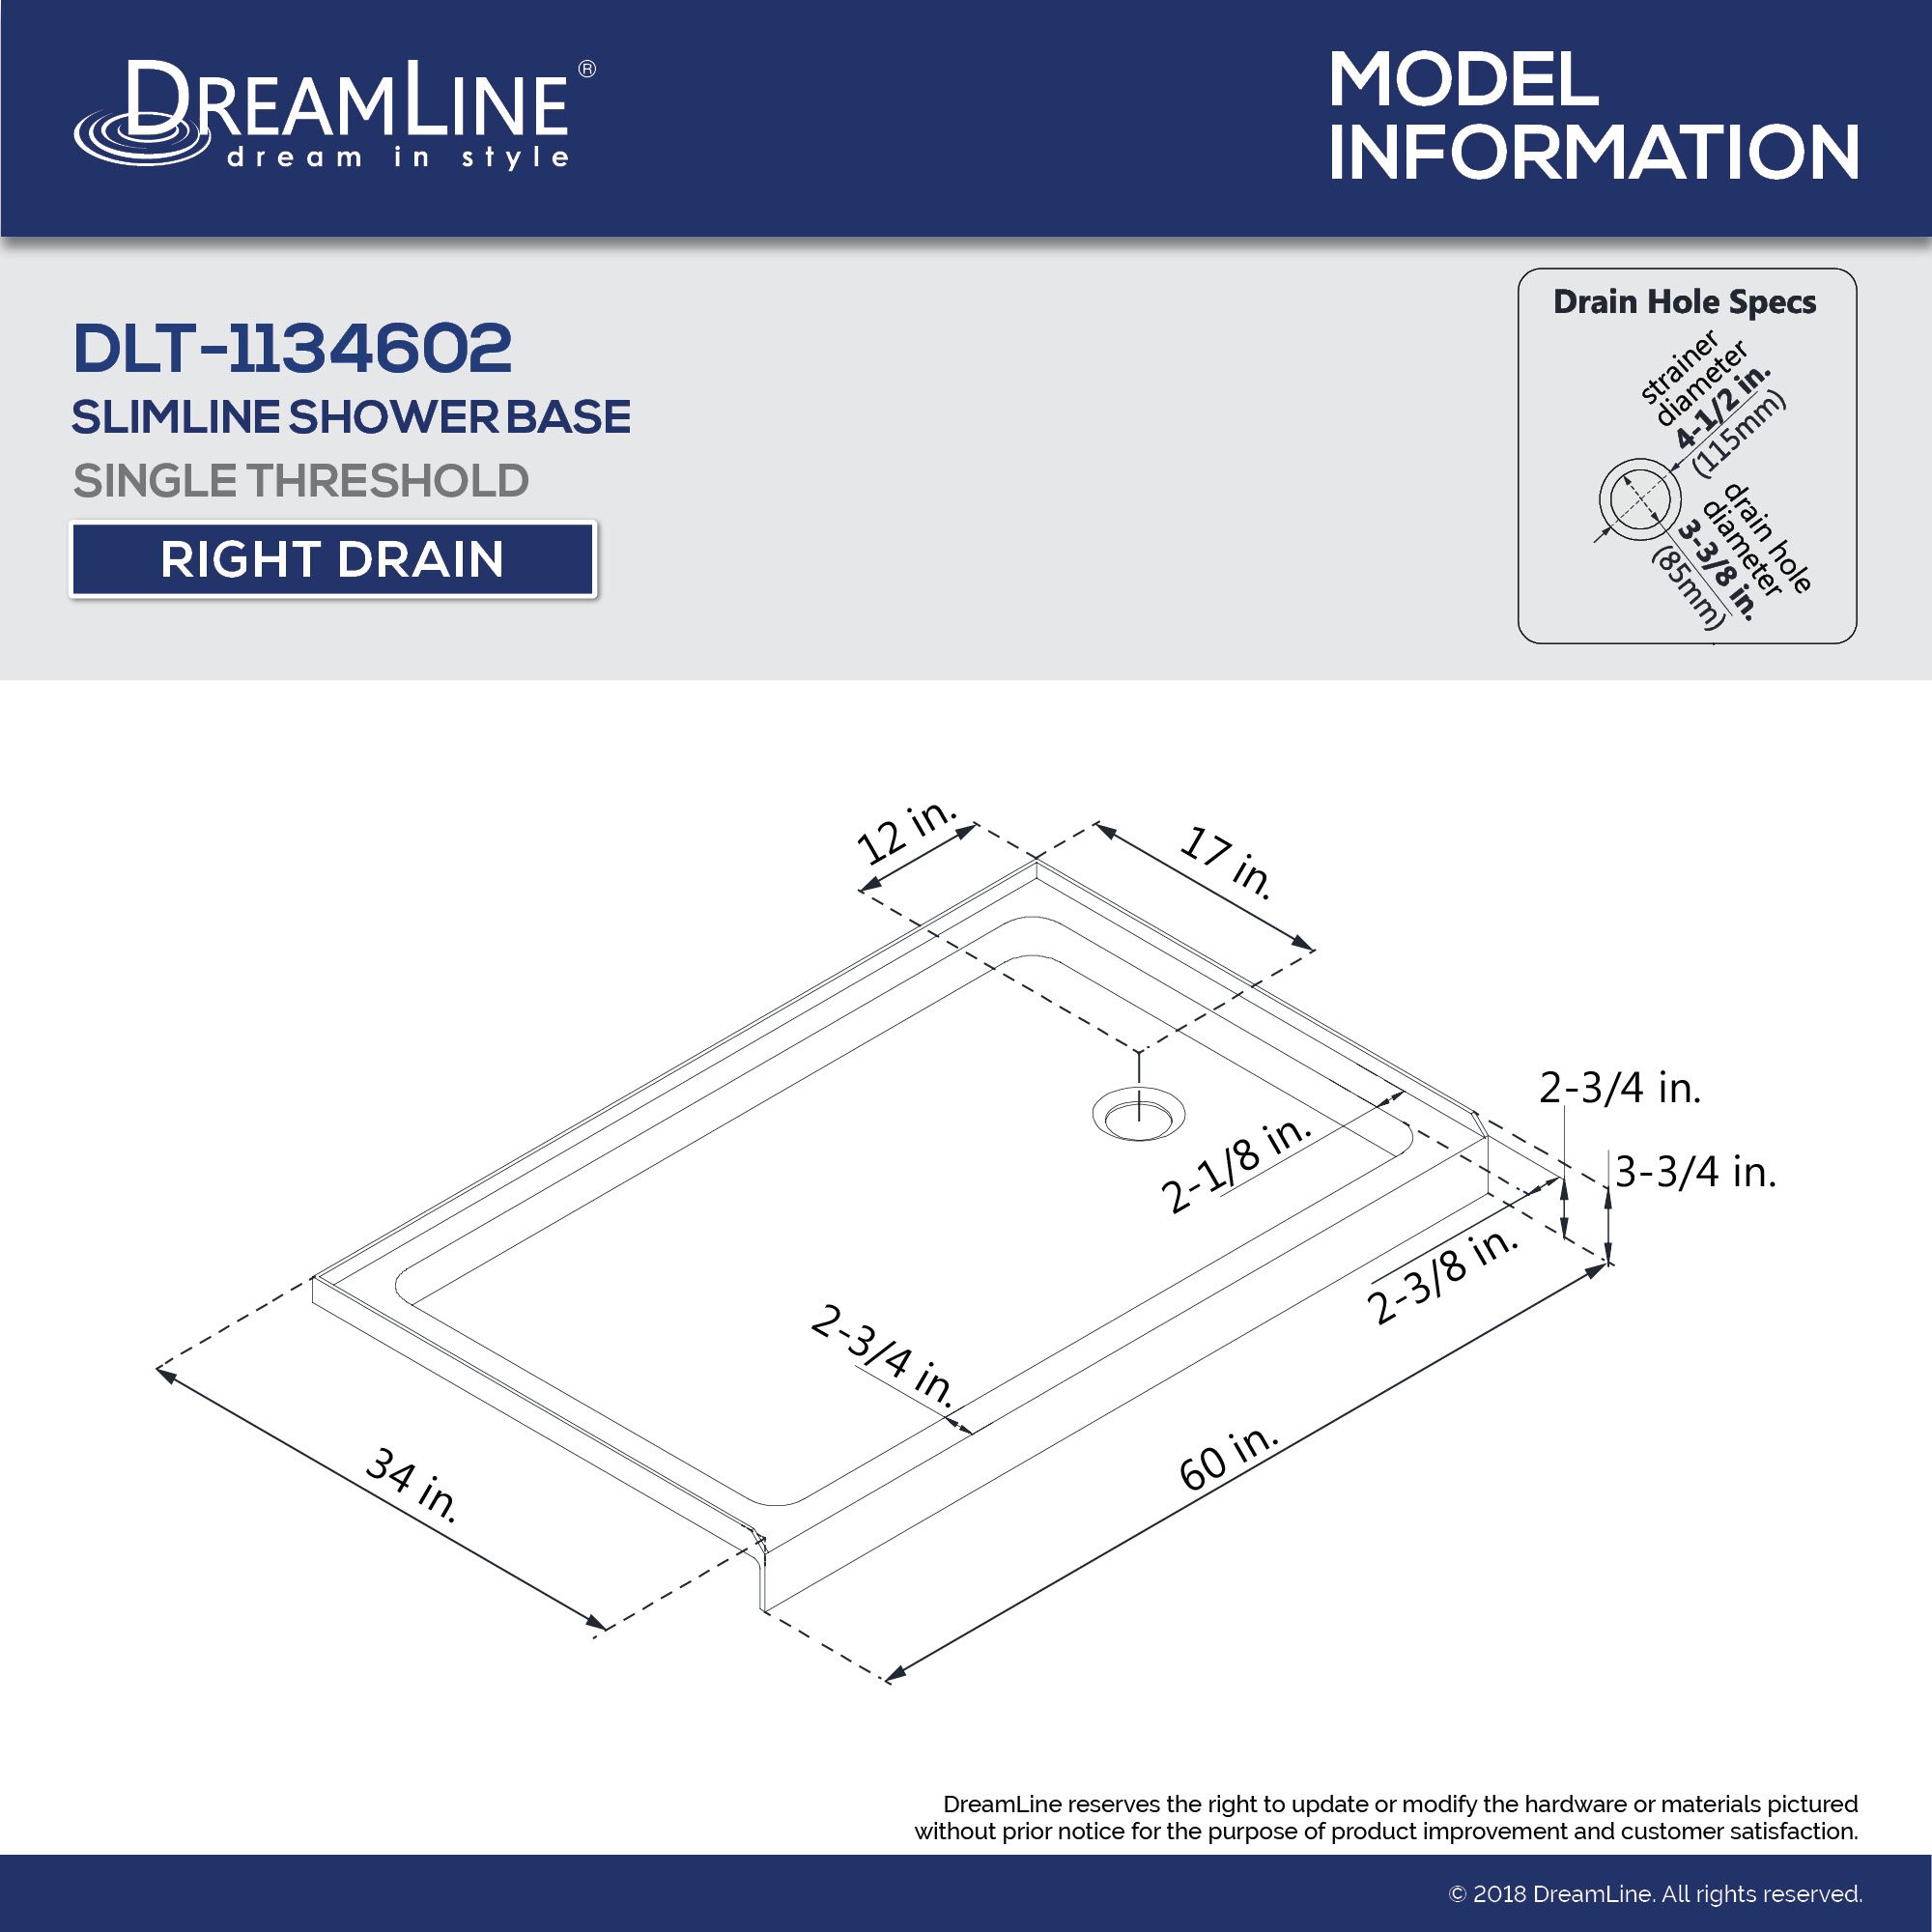 DreamLine Encore 34 in. D x 60 in. W x 78 3/4 in. H Bypass Shower Door in Chrome and Right Drain Black Base Kit